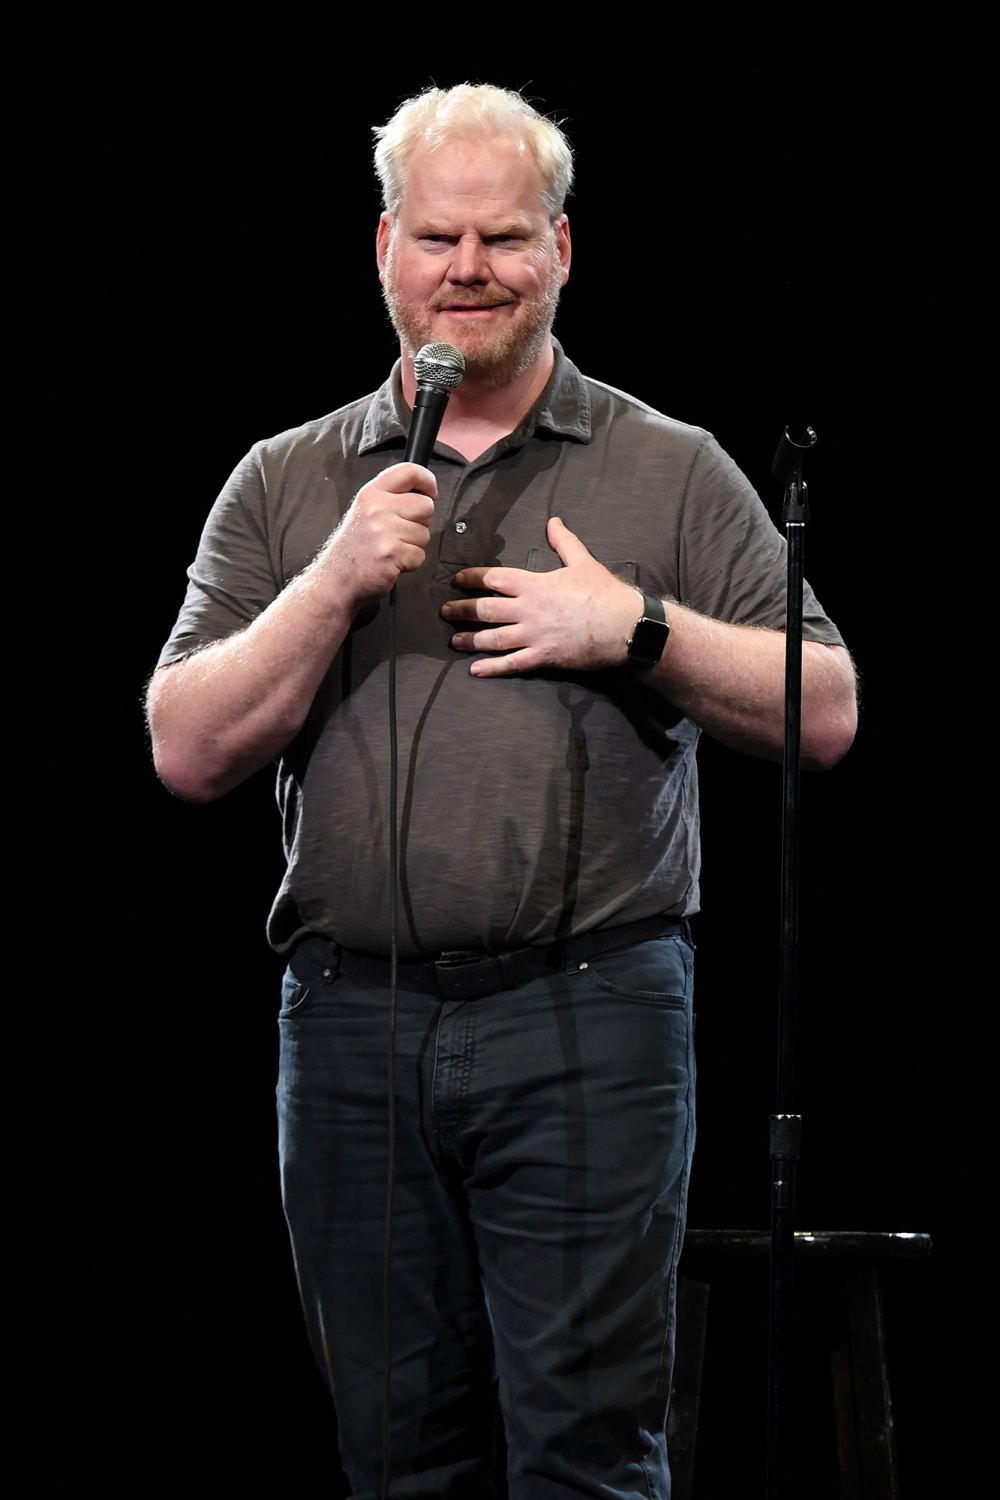 Jim Gaffigan: 25 Things You Don’t Know About Me